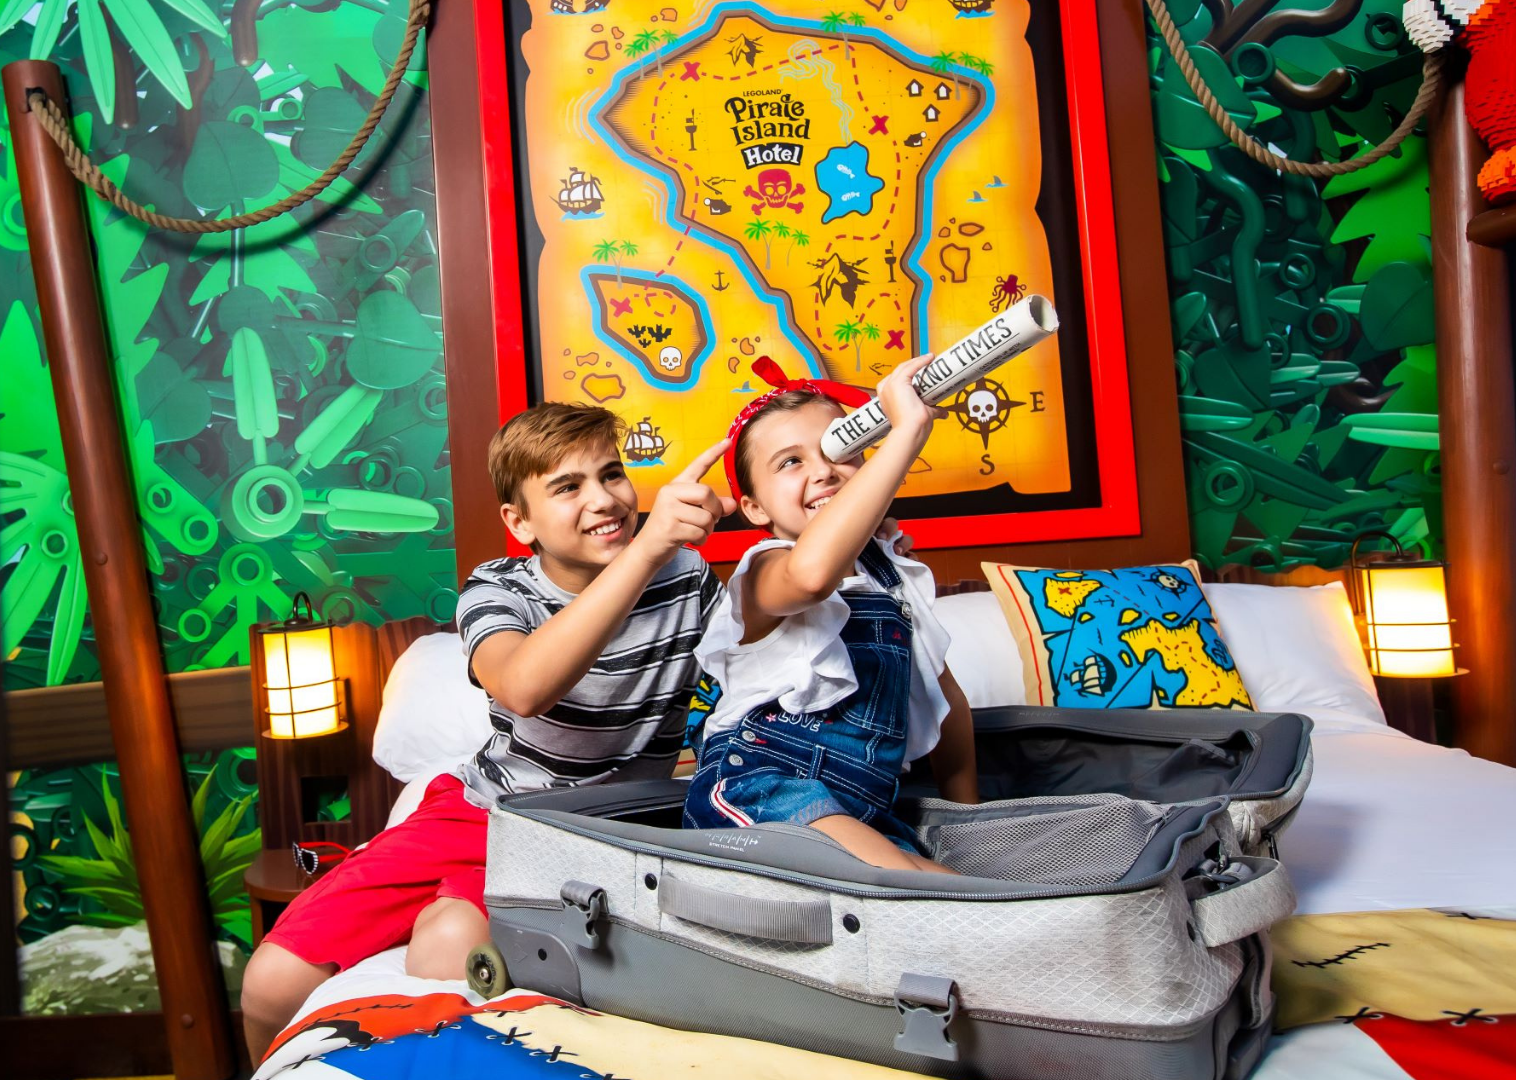 Two kids look through a monocular in a pirate-themed hotel room